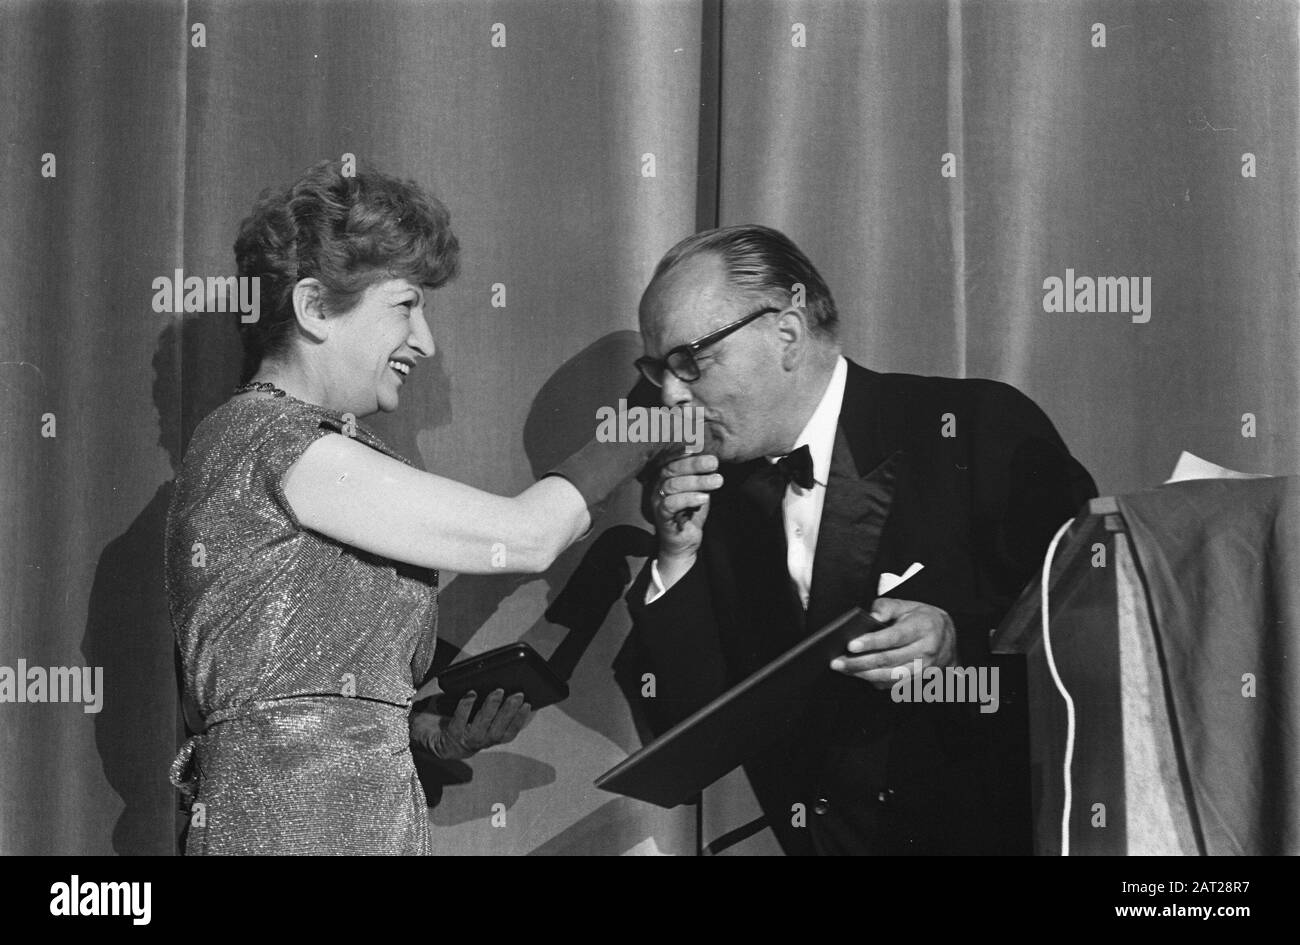 Filmweek Arnhem. Gold medal for [the French singer and actress] Marianne Oswald Annotation: Location; Filmtheater Rembrandt Date: 5 June 1961 Location: Arnhem Keywords: actors, film festivals, movie stars, awards, singers Personal name: Oswald, Marianne Stock Photo